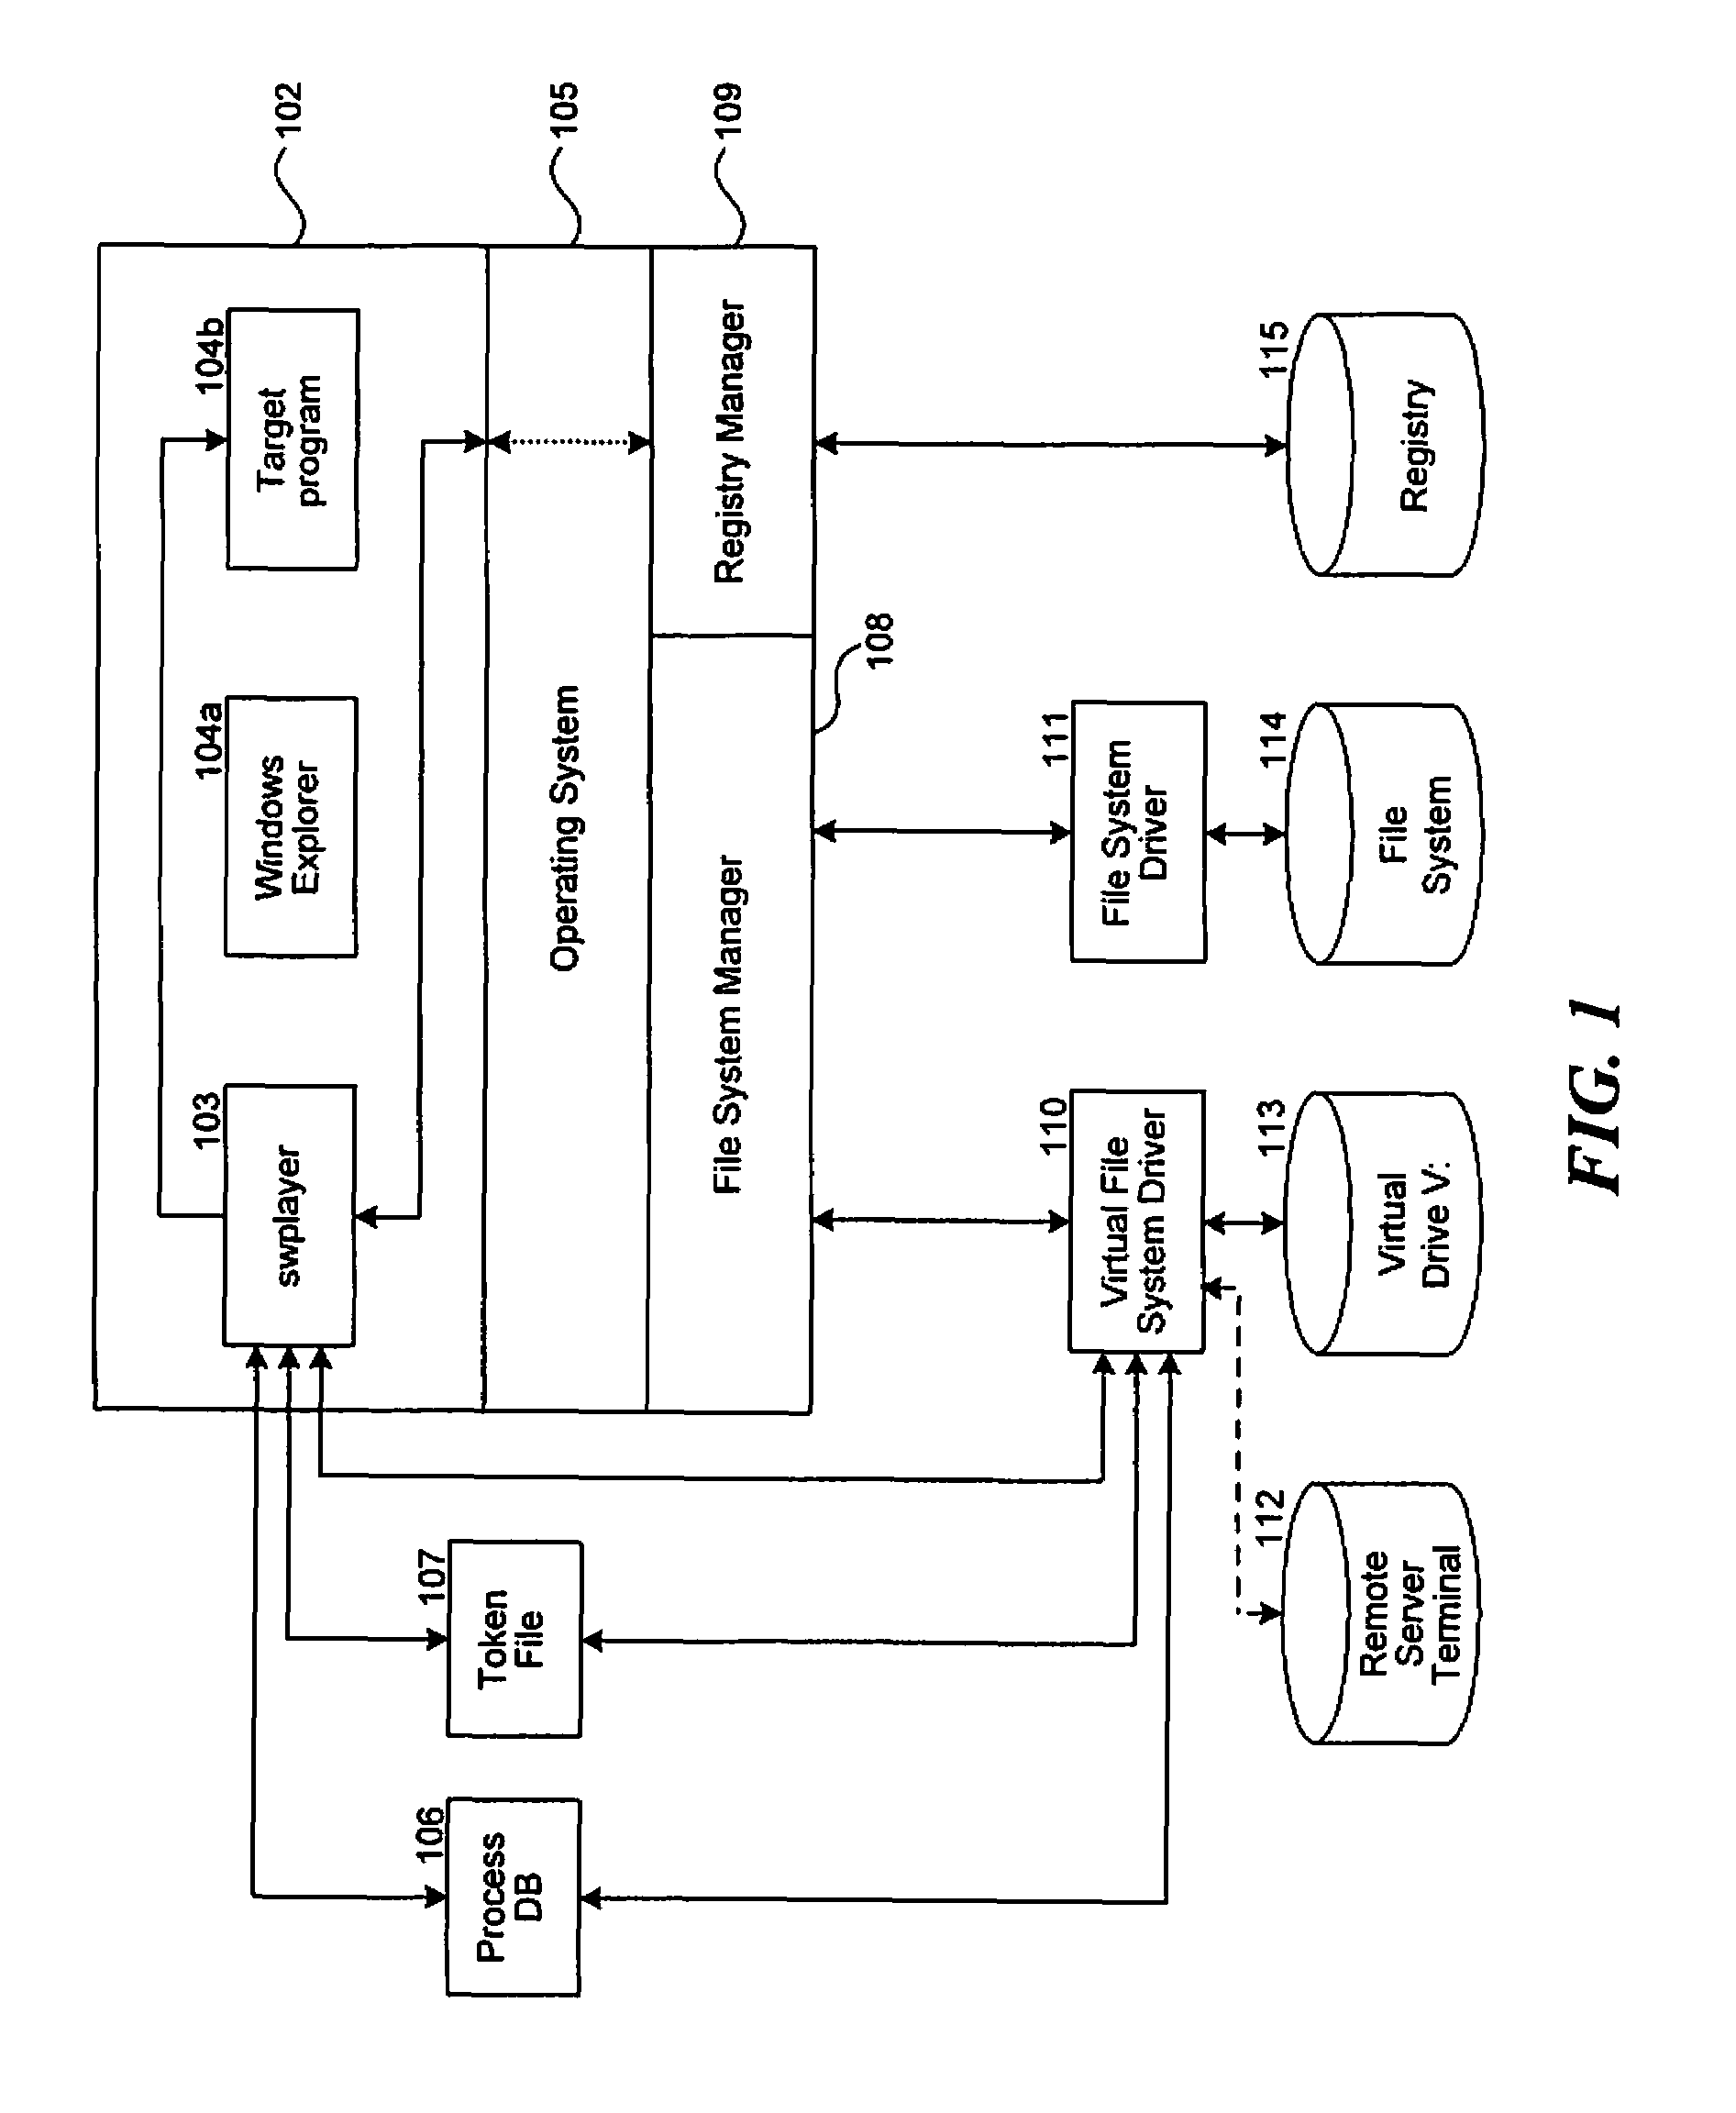 Method and system for executing a software application in a virtual environment